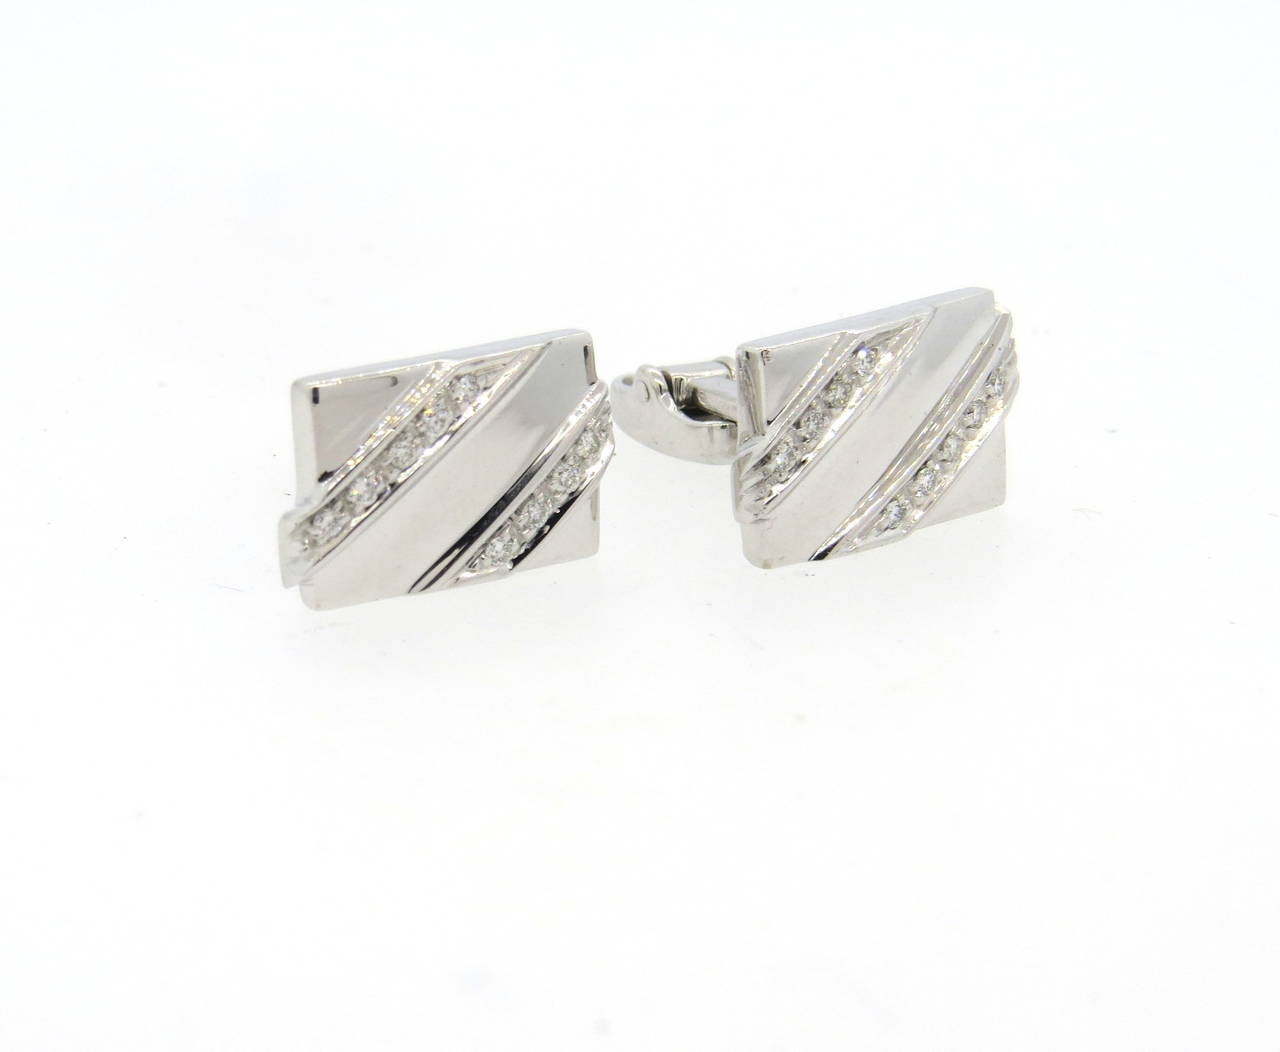 A pair of classic 18k white gold cufflinks, decorated with approximately 0.18ctw in GH/VS diamonds. Top of the cufflink measures 17mm x 11mm. Weight - 15.4 grams